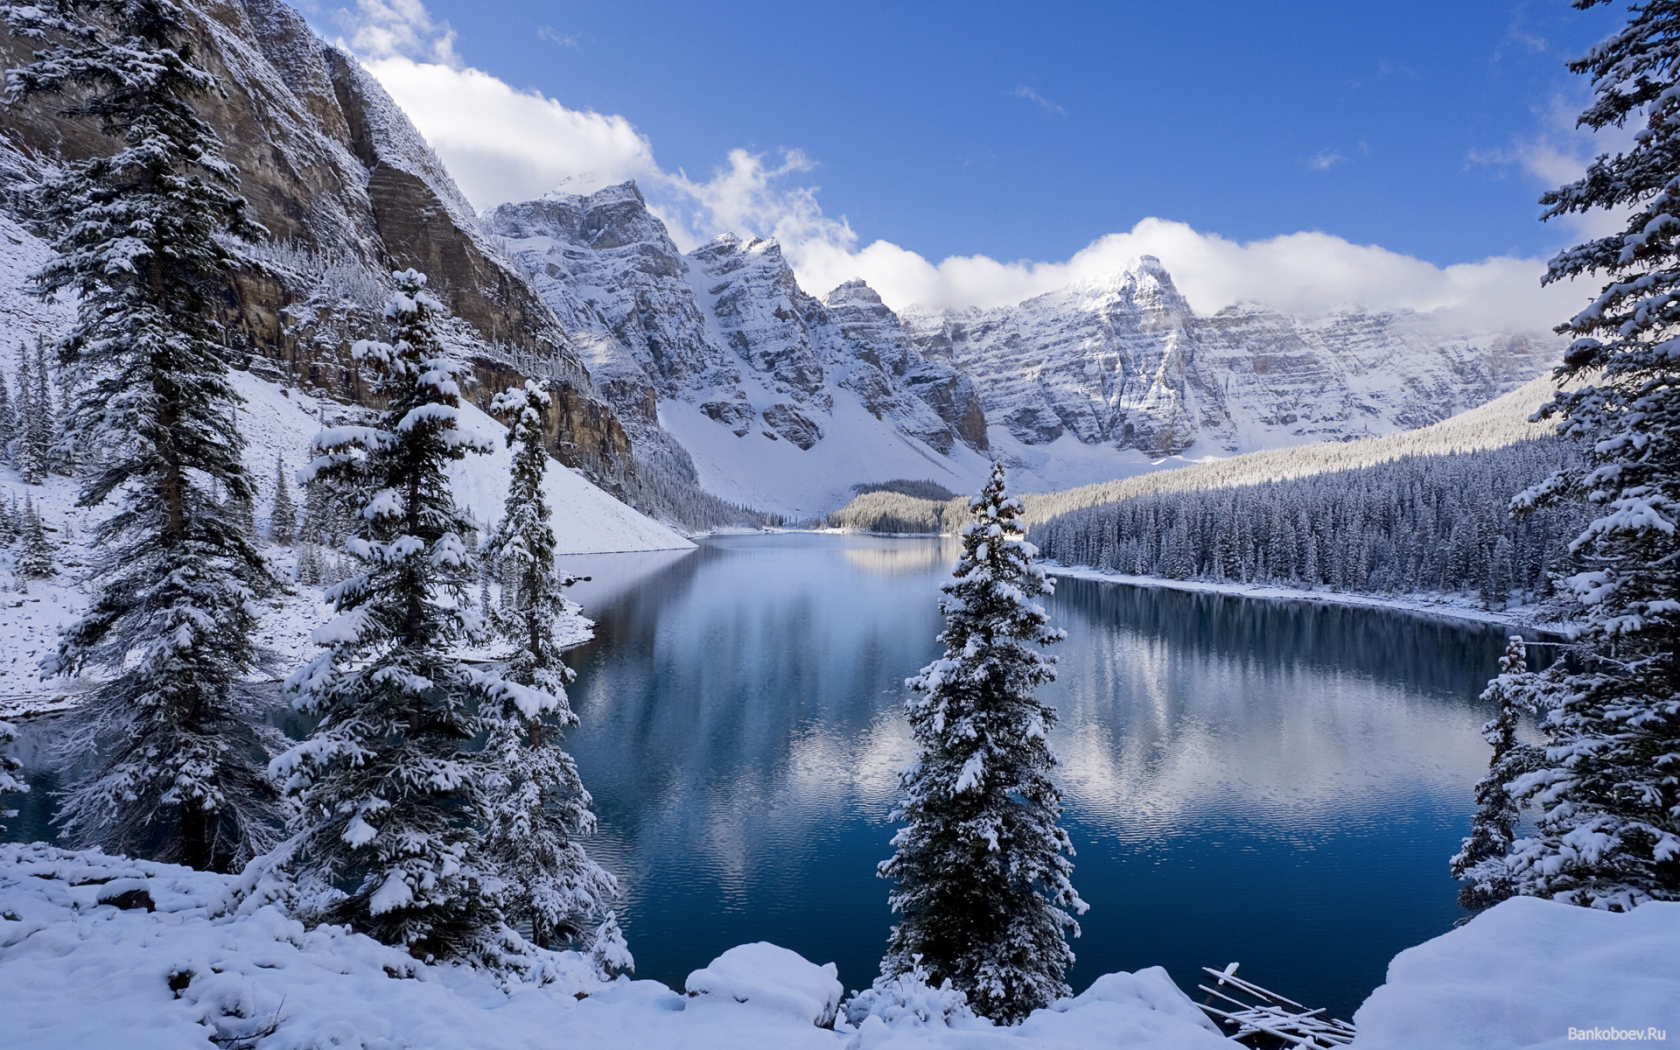 Lake in the winter mountains